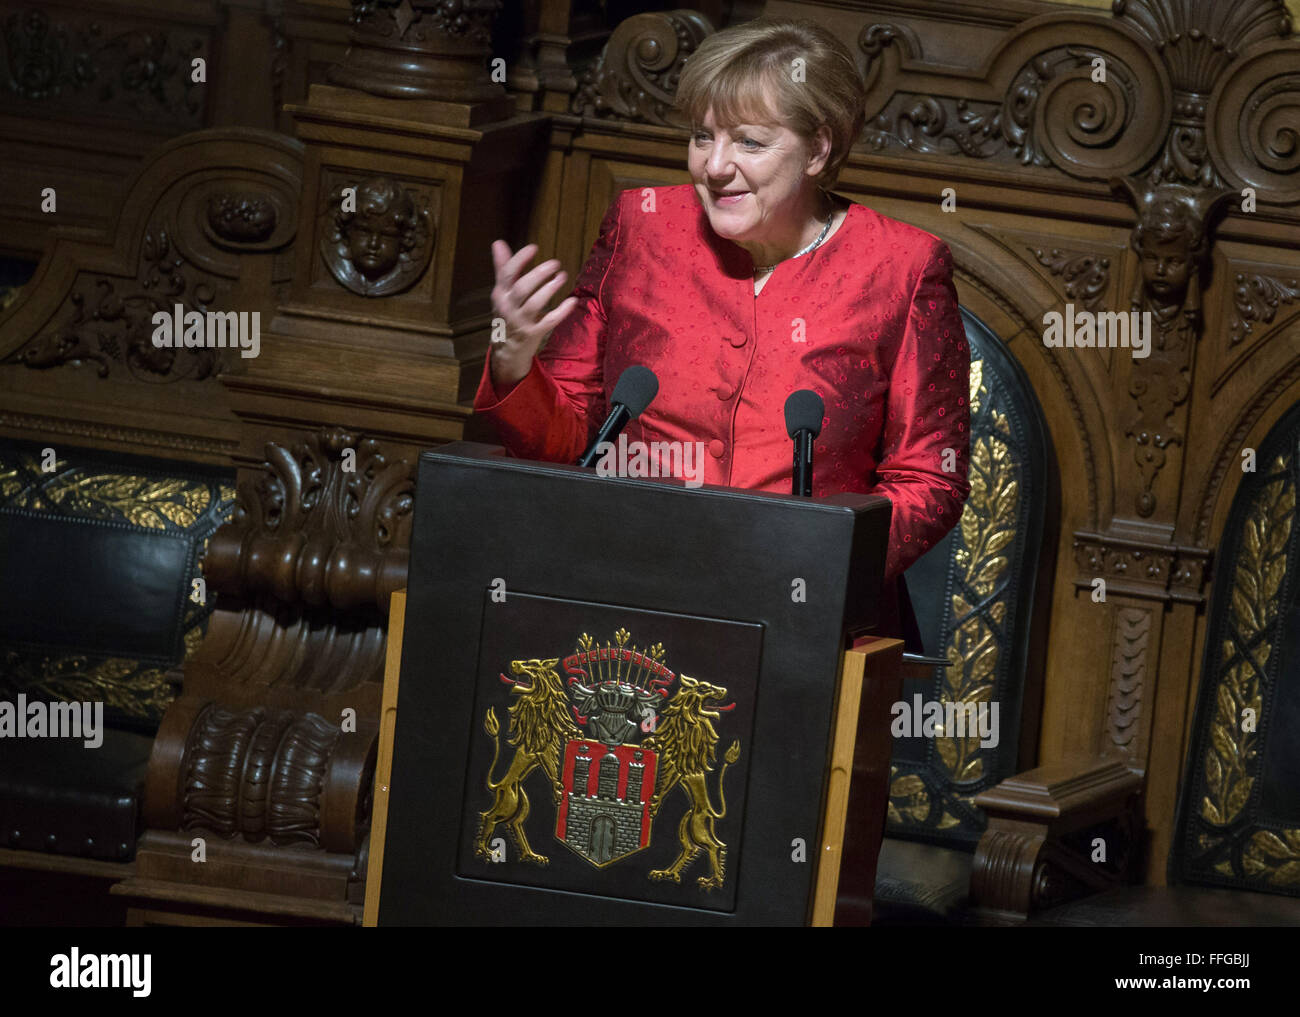 Hamburg, Germany. 12th Feb, 2016. German Chancellor Angela Merkel delivers a speech at the Matthiae dinner at the city hall of Hamburg, Germany, 12 February 2016. Britain's Prime Minister David Cameron and German Chancellor Angela Merkel are guests of honour at the oldest feast in the world. Since 1356, the leaders of the Hansa city invite distinguished guests to the Matthiae dinner. Photo: LUKAS SCHULZE/dpa/Alamy Live News Stock Photo